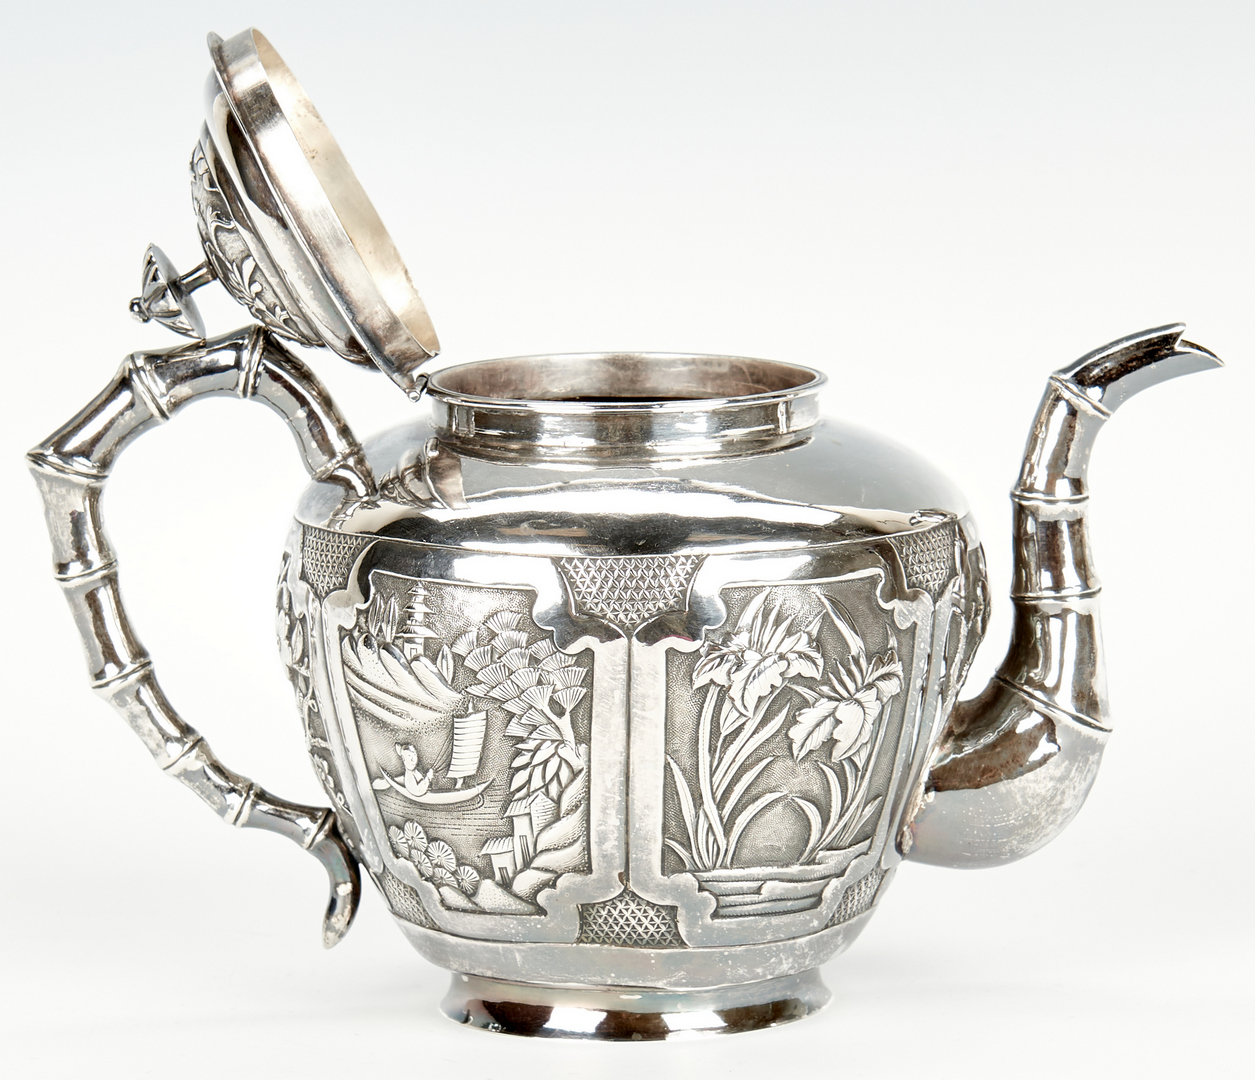 Lot 1: 3 Pc. Chinese Export Silver Tea Service